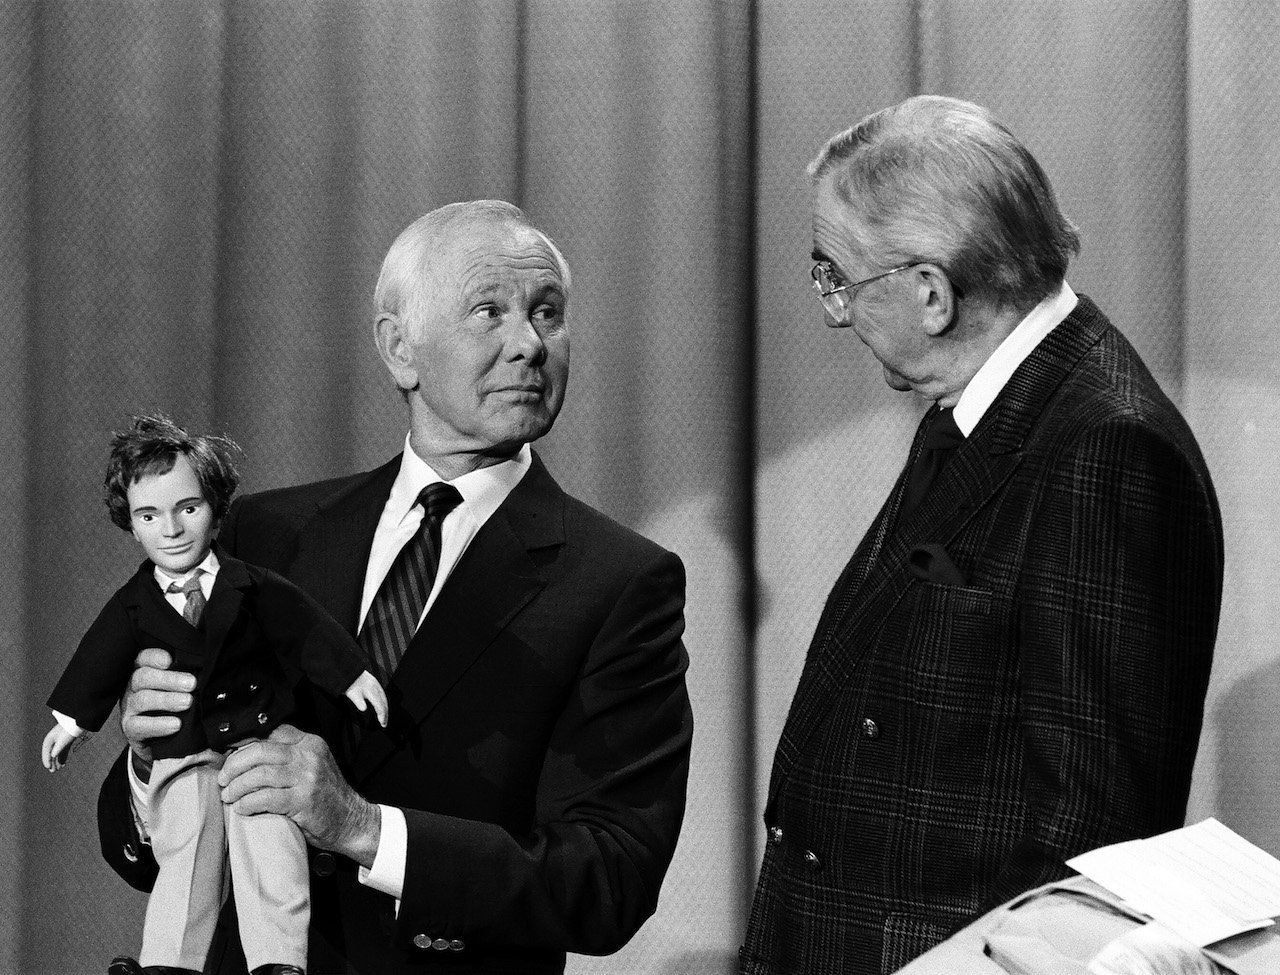 Johnny Carson holding a doll and looking at Ed McMahon on 'The Tonight Show' c. 1990